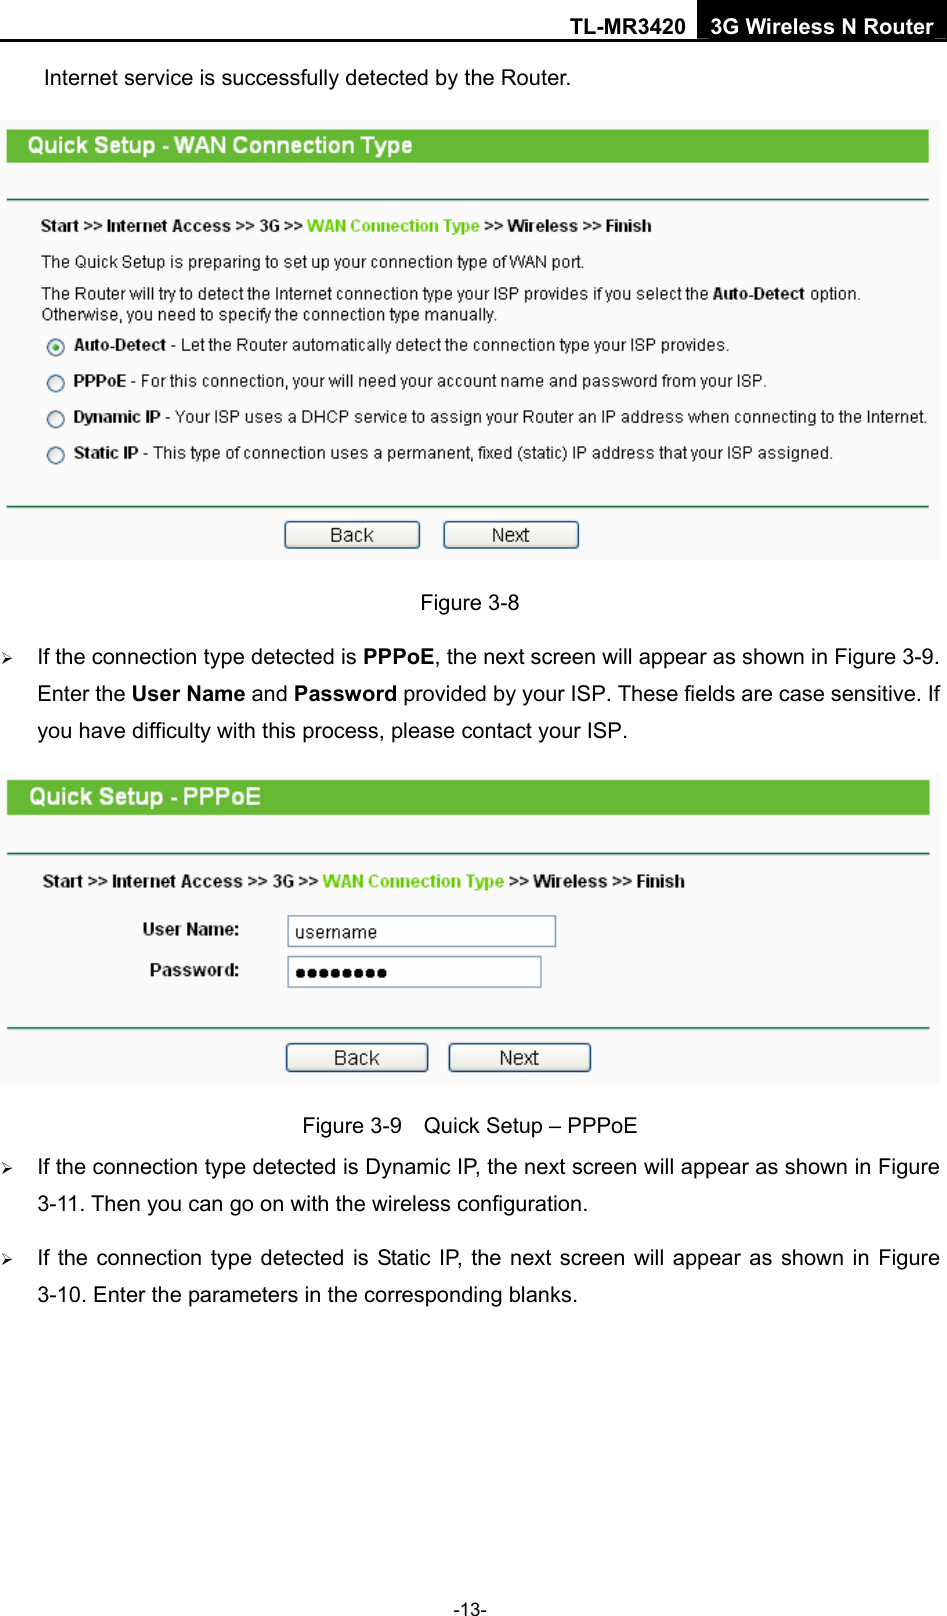 TL-MR3420 3G Wireless N Router -13- Internet service is successfully detected by the Router.  Figure 3-8 ¾ If the connection type detected is PPPoE, the next screen will appear as shown in Figure 3-9. Enter the User Name and Password provided by your ISP. These fields are case sensitive. If you have difficulty with this process, please contact your ISP.  Figure 3-9    Quick Setup – PPPoE ¾ If the connection type detected is Dynamic IP, the next screen will appear as shown in Figure 3-11. Then you can go on with the wireless configuration. ¾ If the connection type detected is Static IP, the next screen will appear as shown in Figure 3-10. Enter the parameters in the corresponding blanks. 